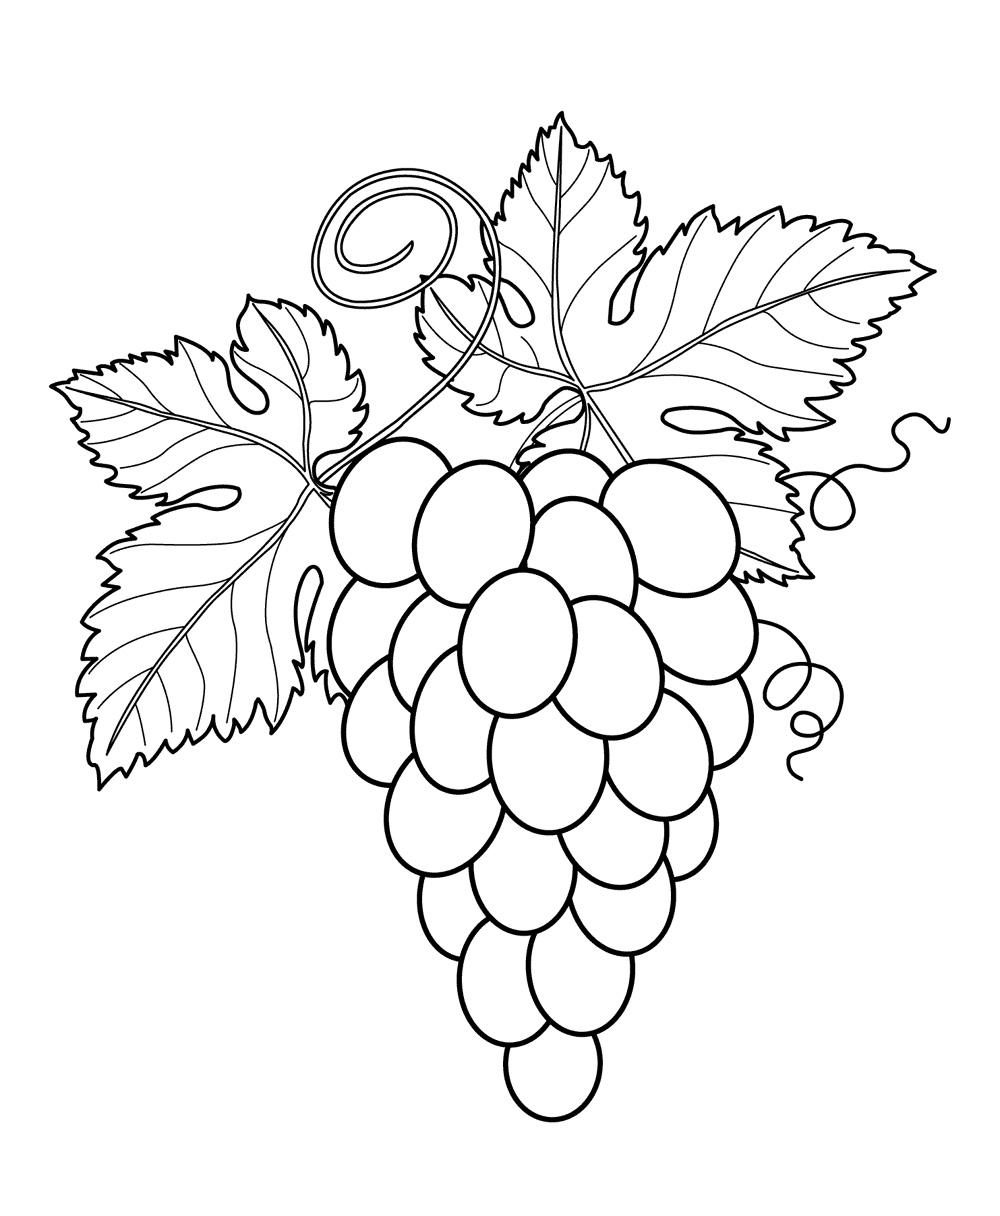 Coloring Book Fruits 5